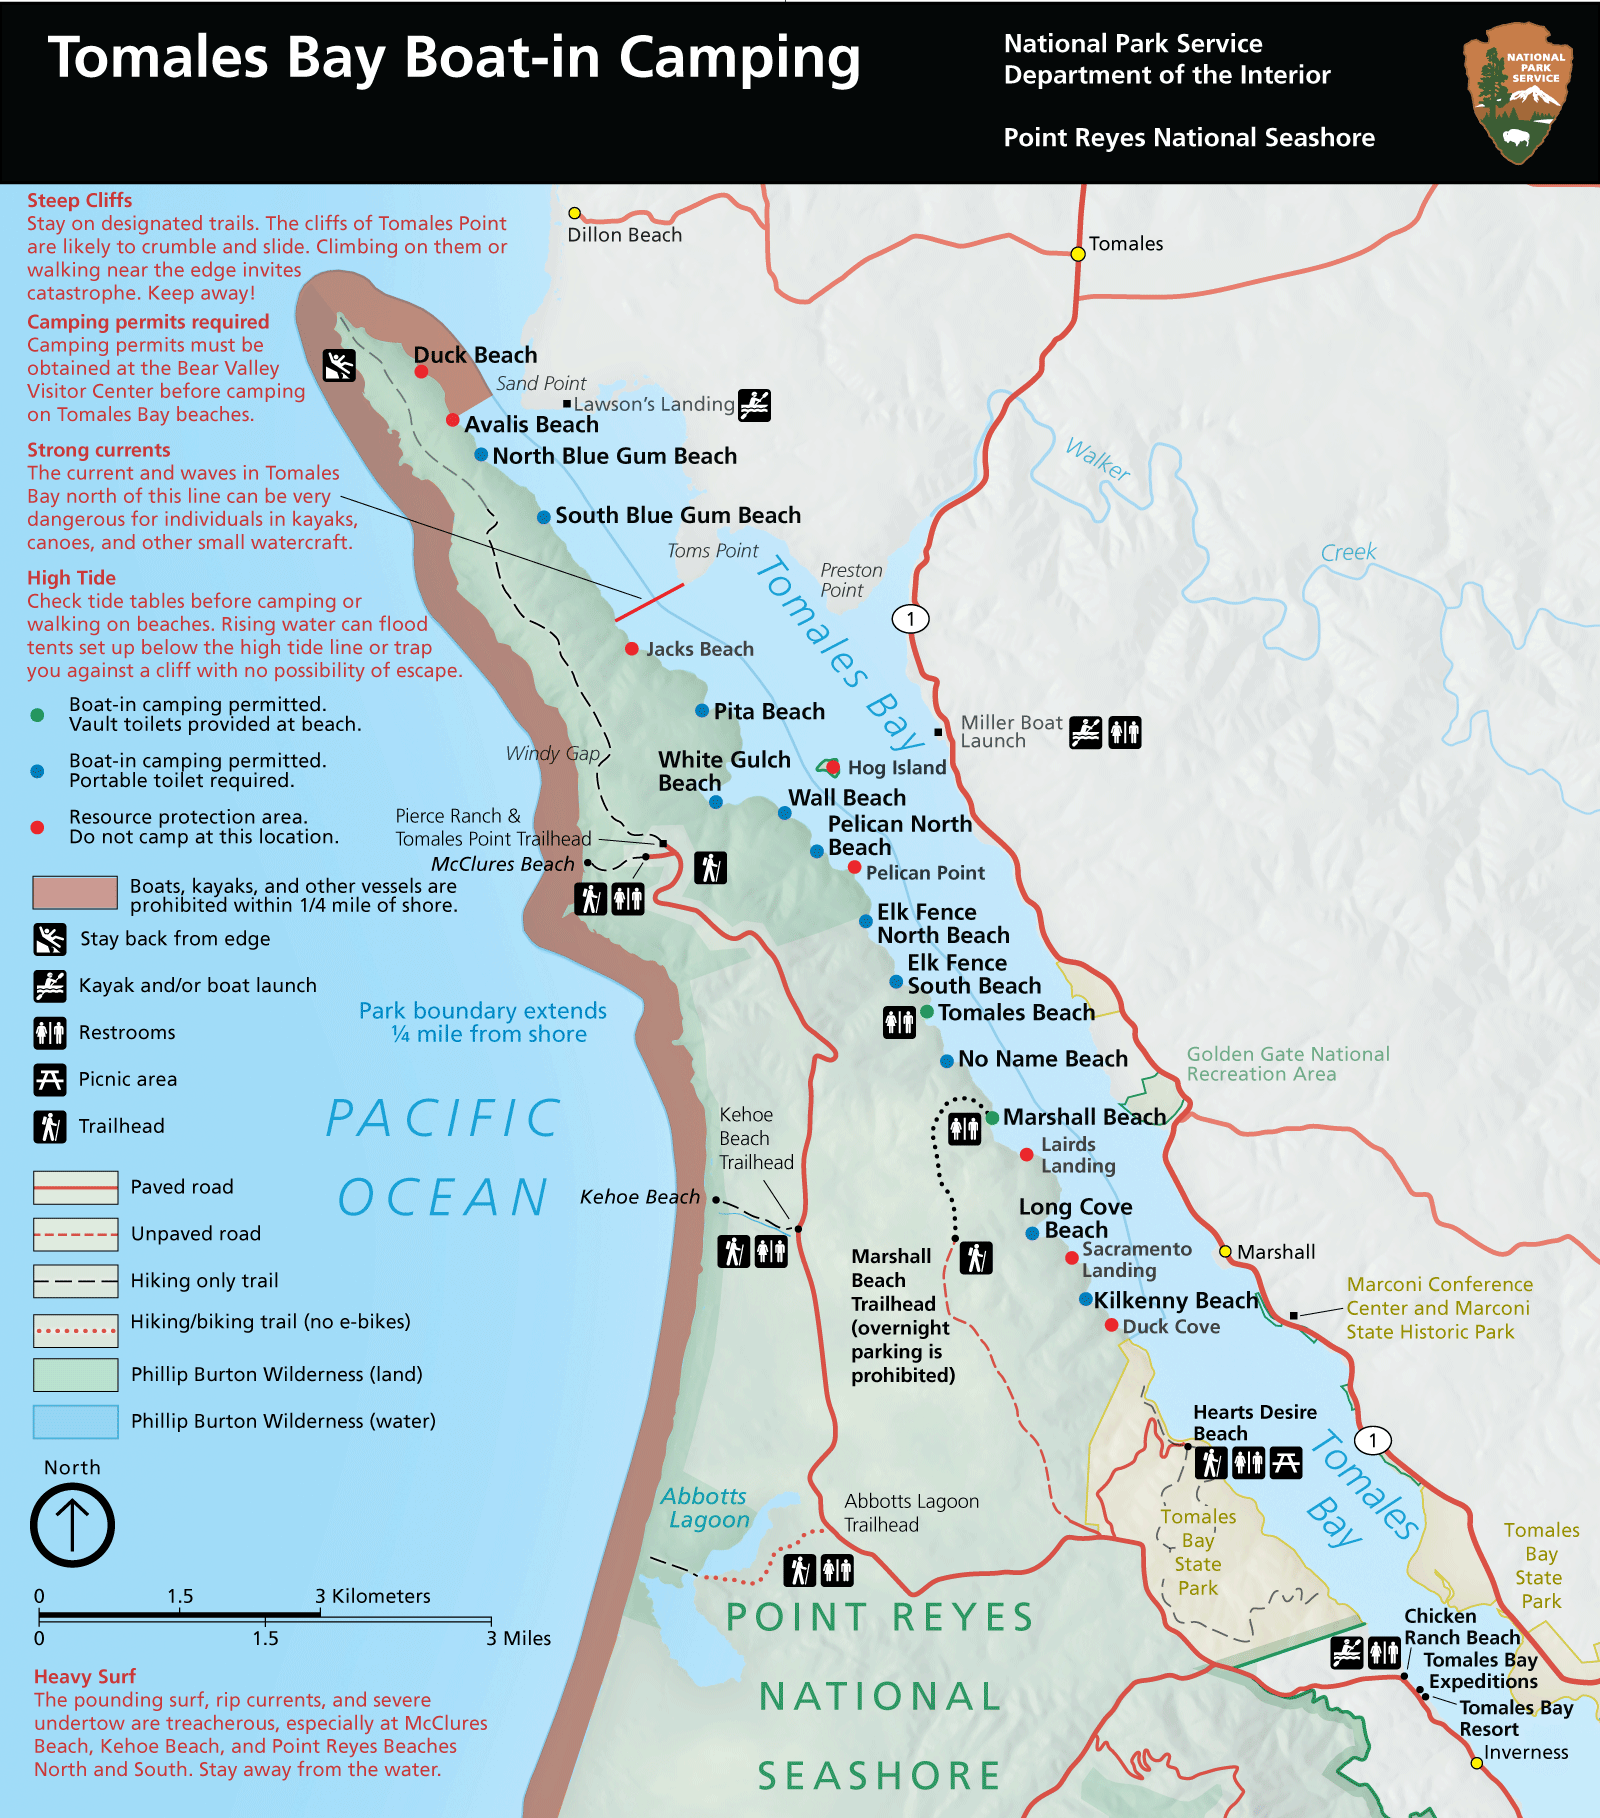 A map for locating beaches along Tomales Bay upon which camping is permitted. Click on this image to download a higher resolution PDF version of the map that also contains more detailed alt text.